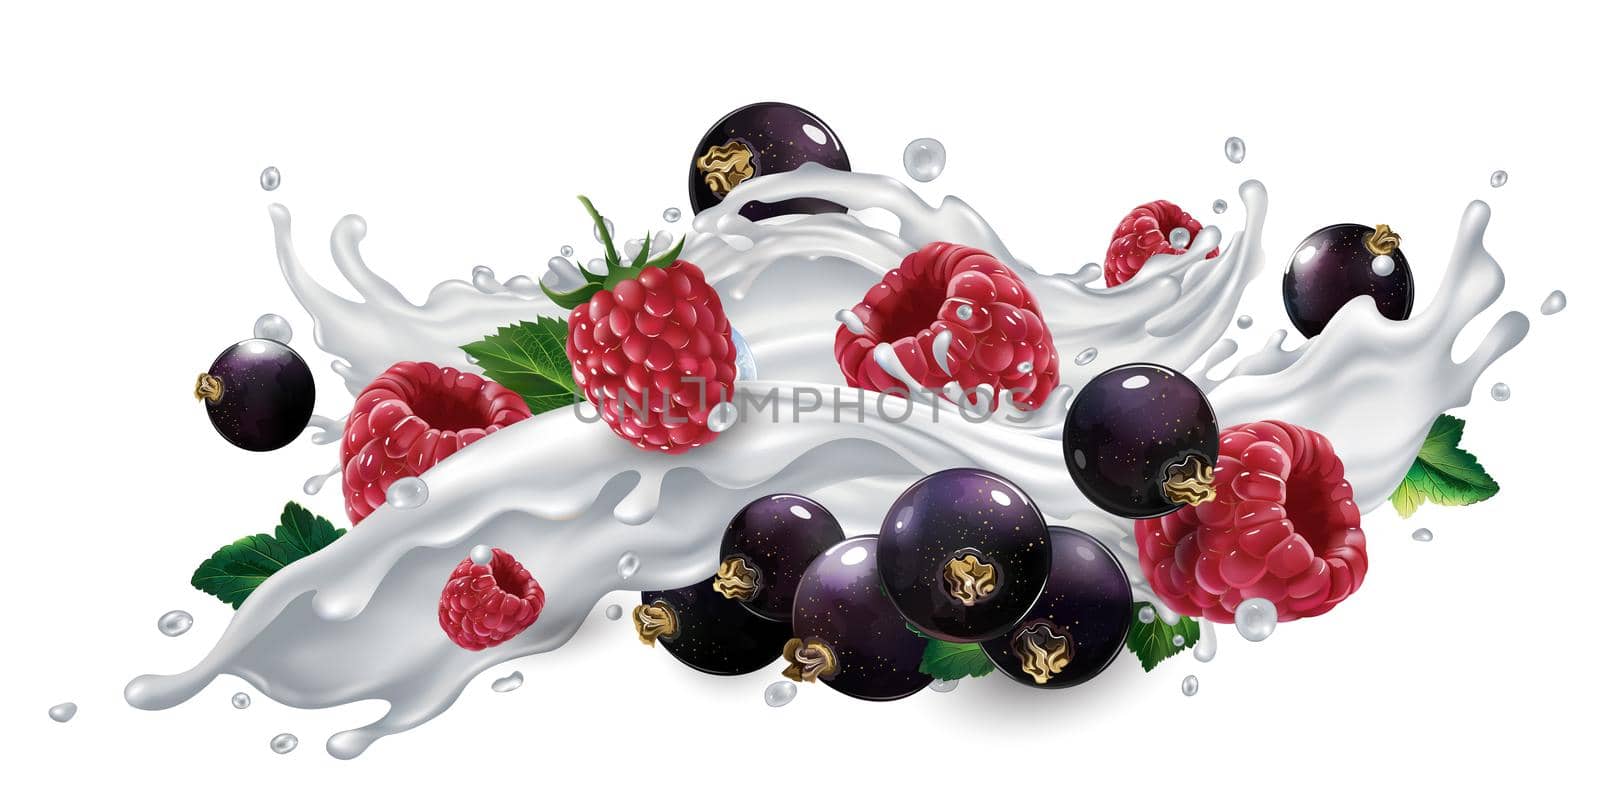 Fresh black currants and raspberries in a splash of milk or yogurt on a white background. Realistic style illustration.